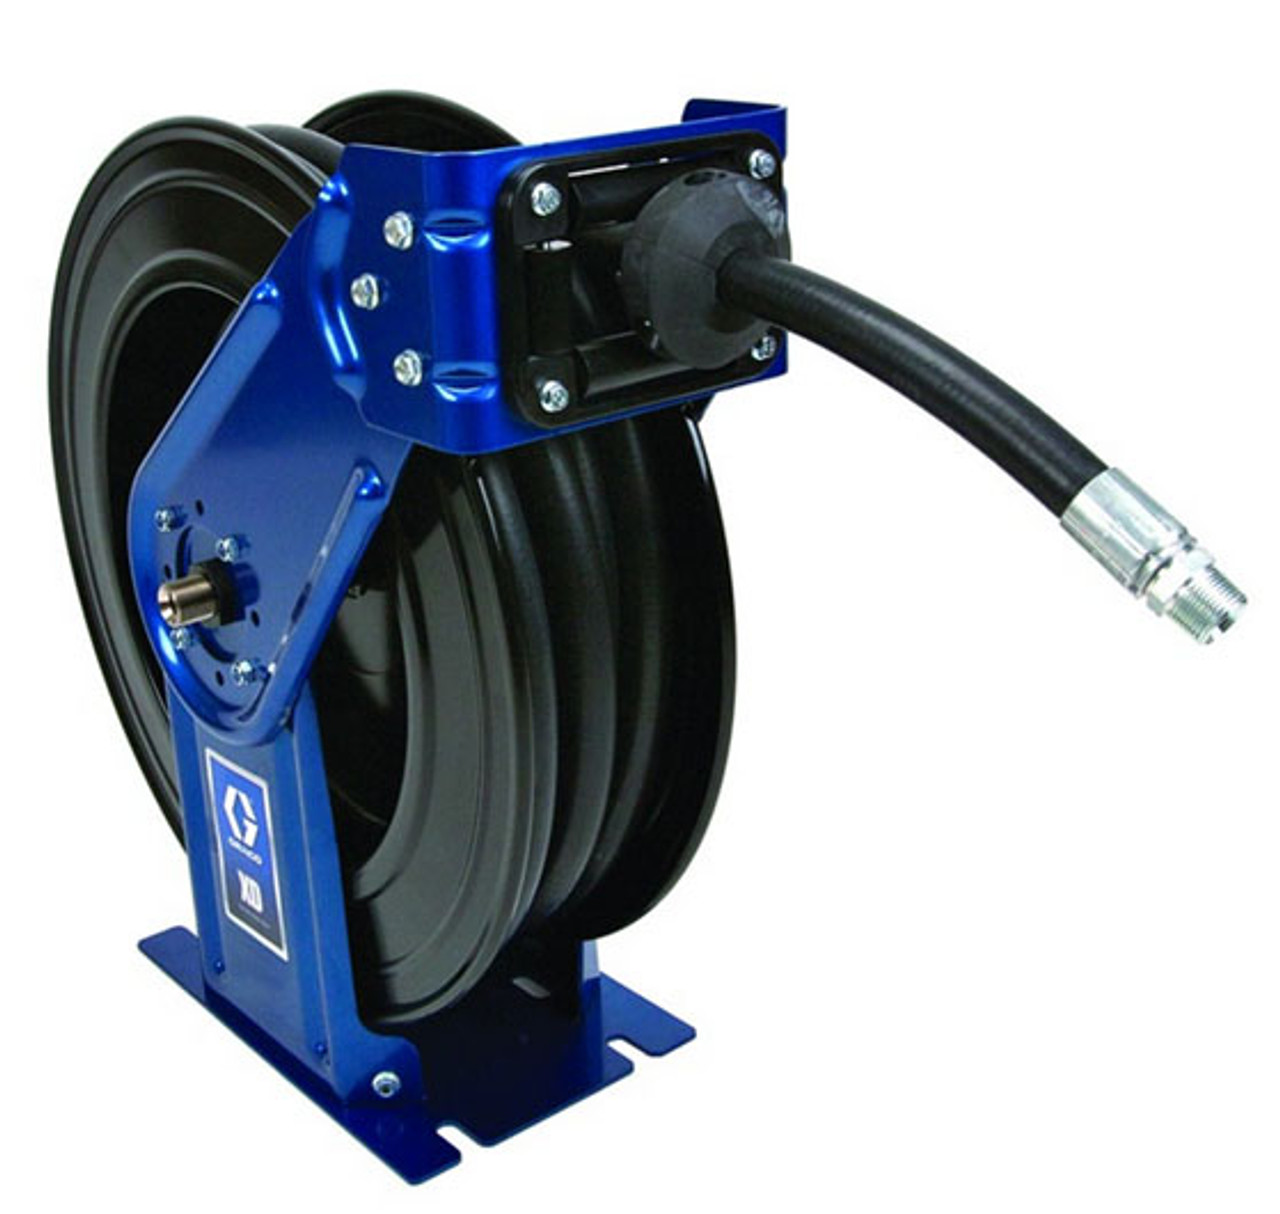 Graco XD30 Grease Hose Reel w/ 1/2 in. x 50 ft. Hose